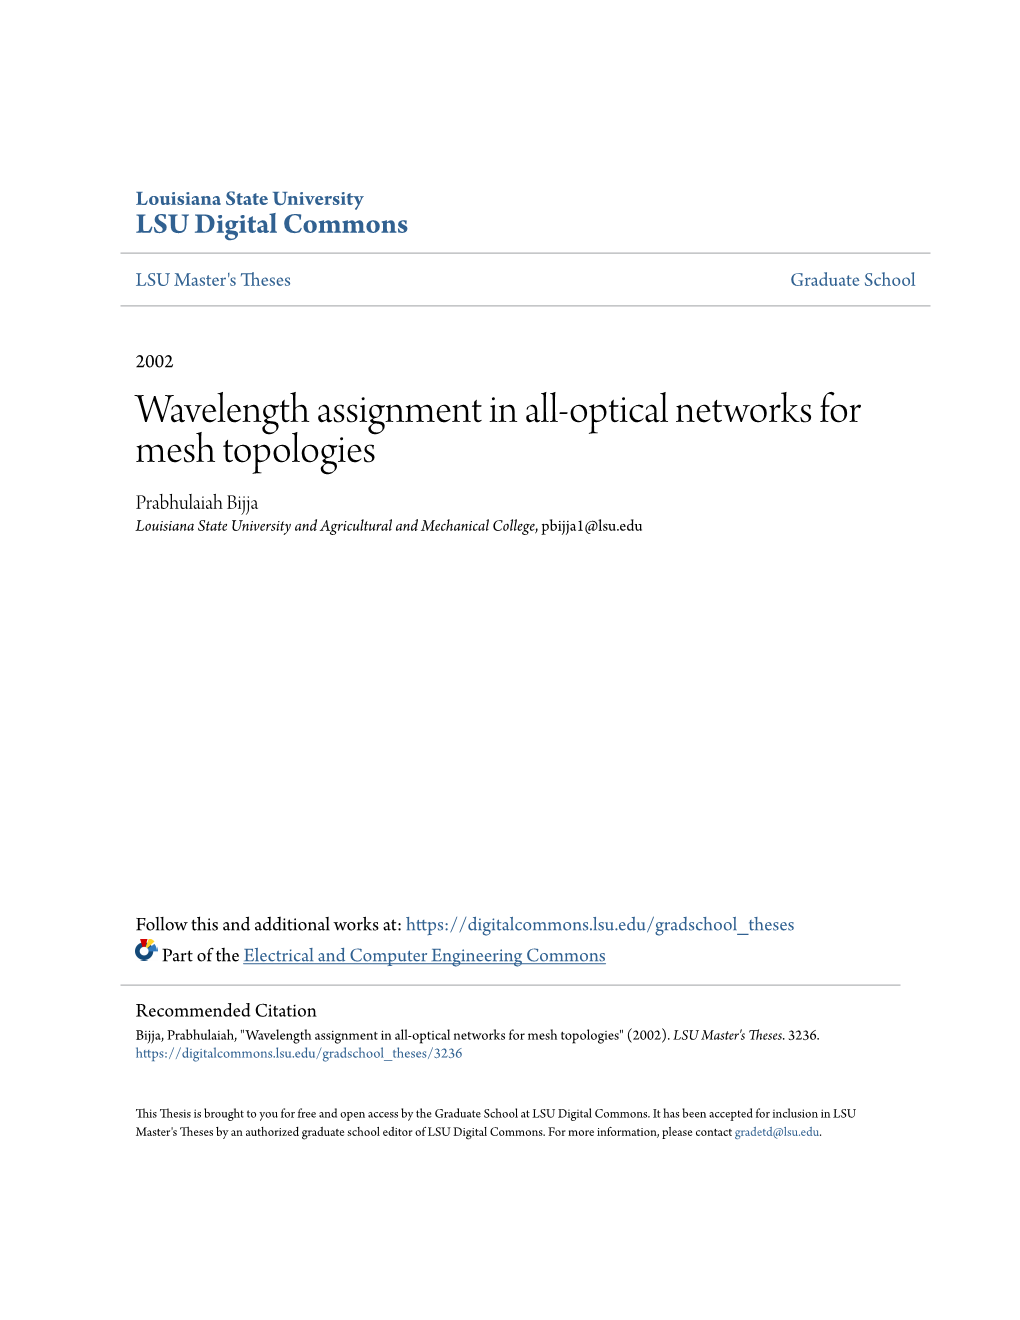 Wavelength Assignment in All-Optical Networks for Mesh Topologies